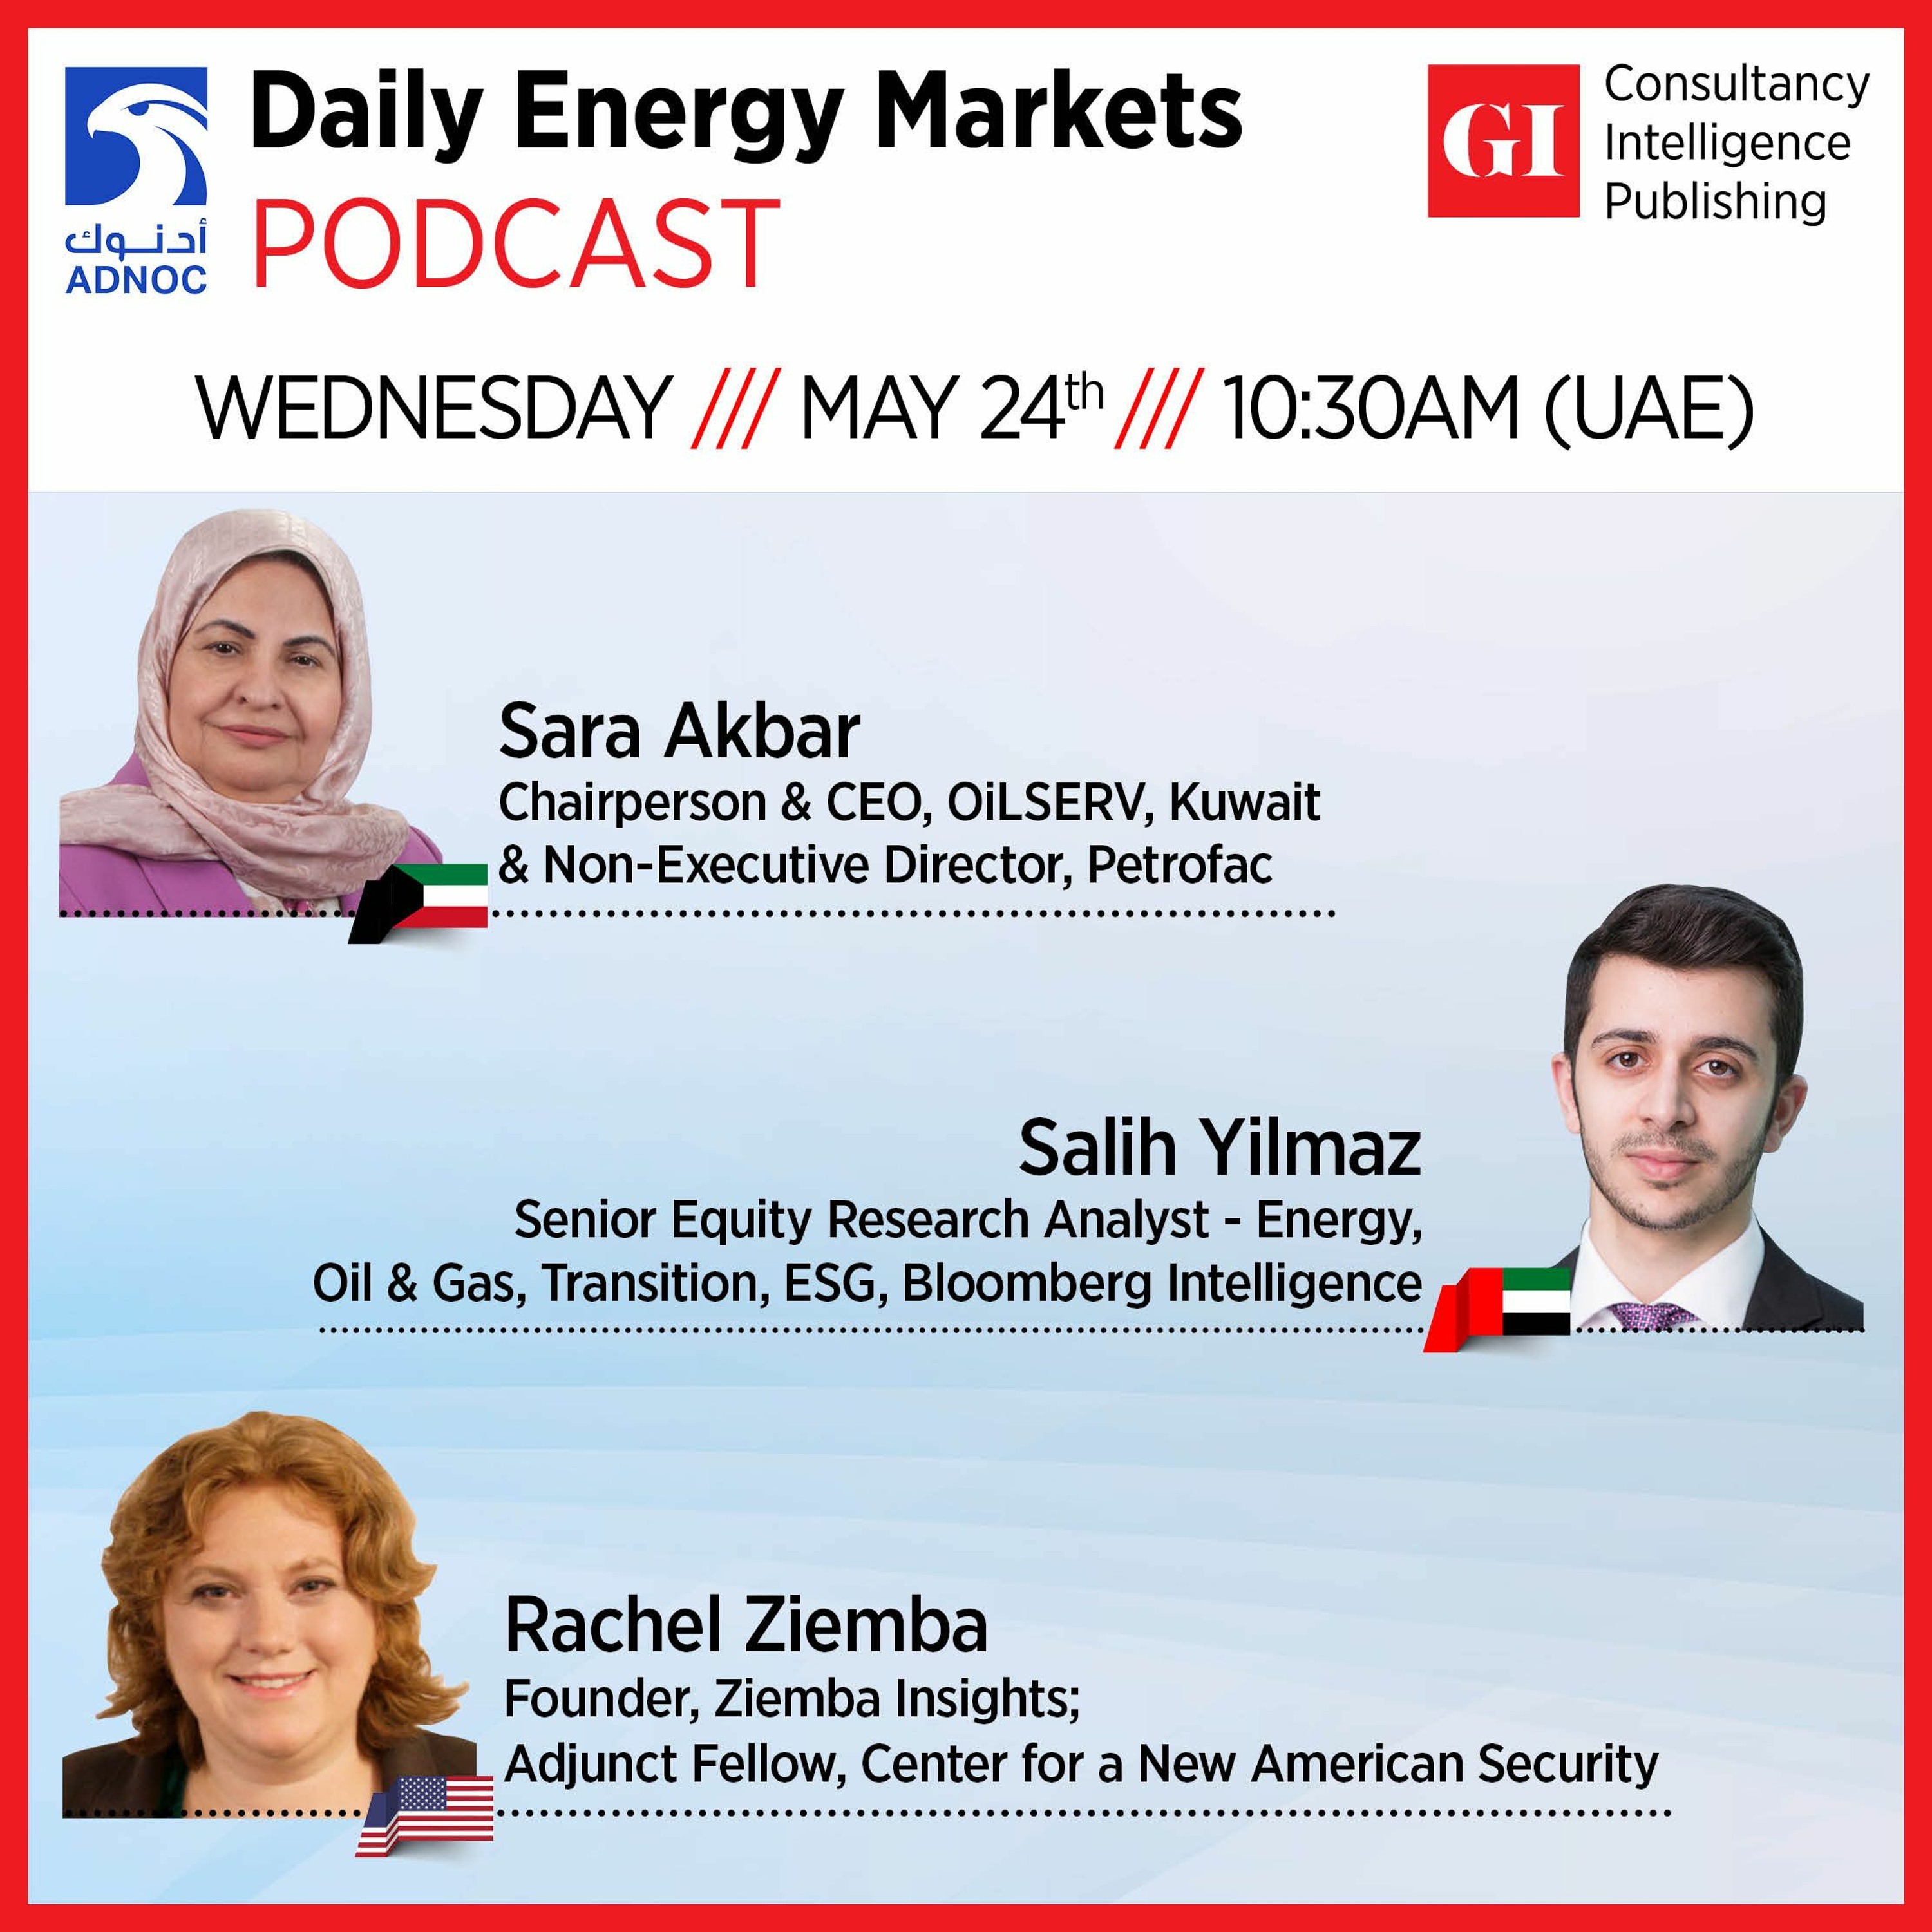 PODCAST: Daily Energy Markets - May 24th